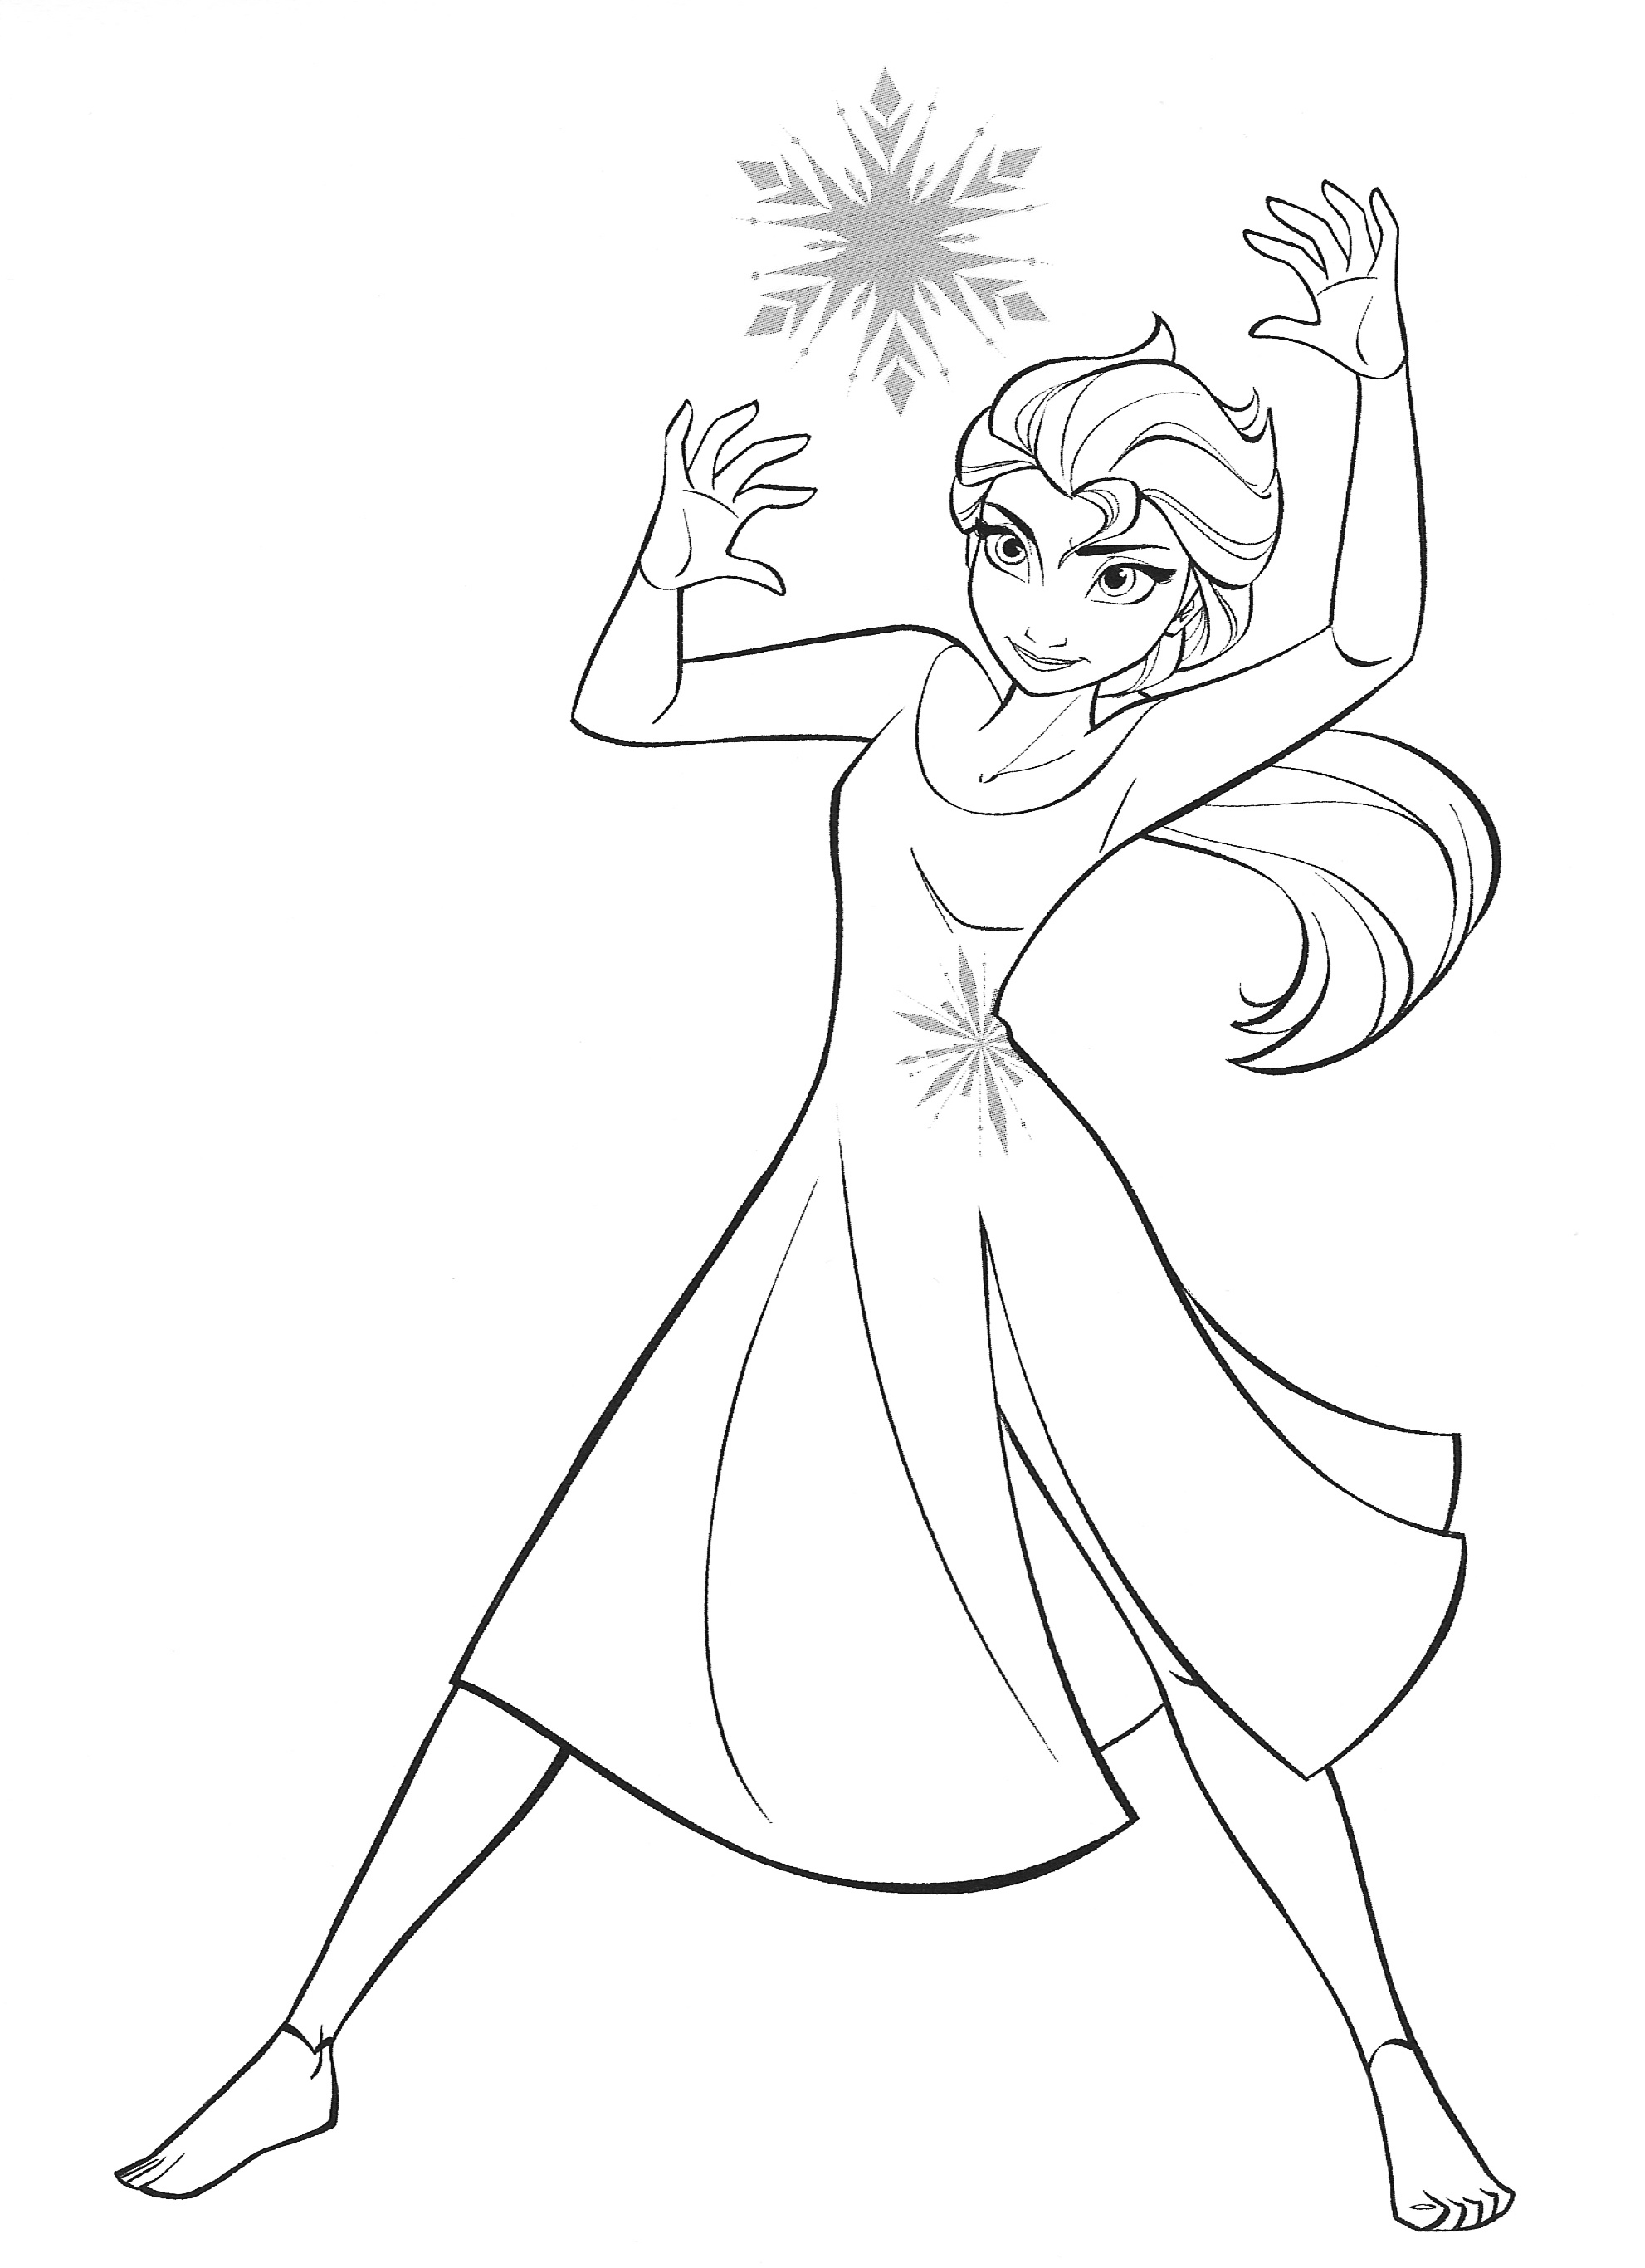 Disney Frozen 2 Coloring Pages Drawing Elsa Anna And Olaf Frozen 2